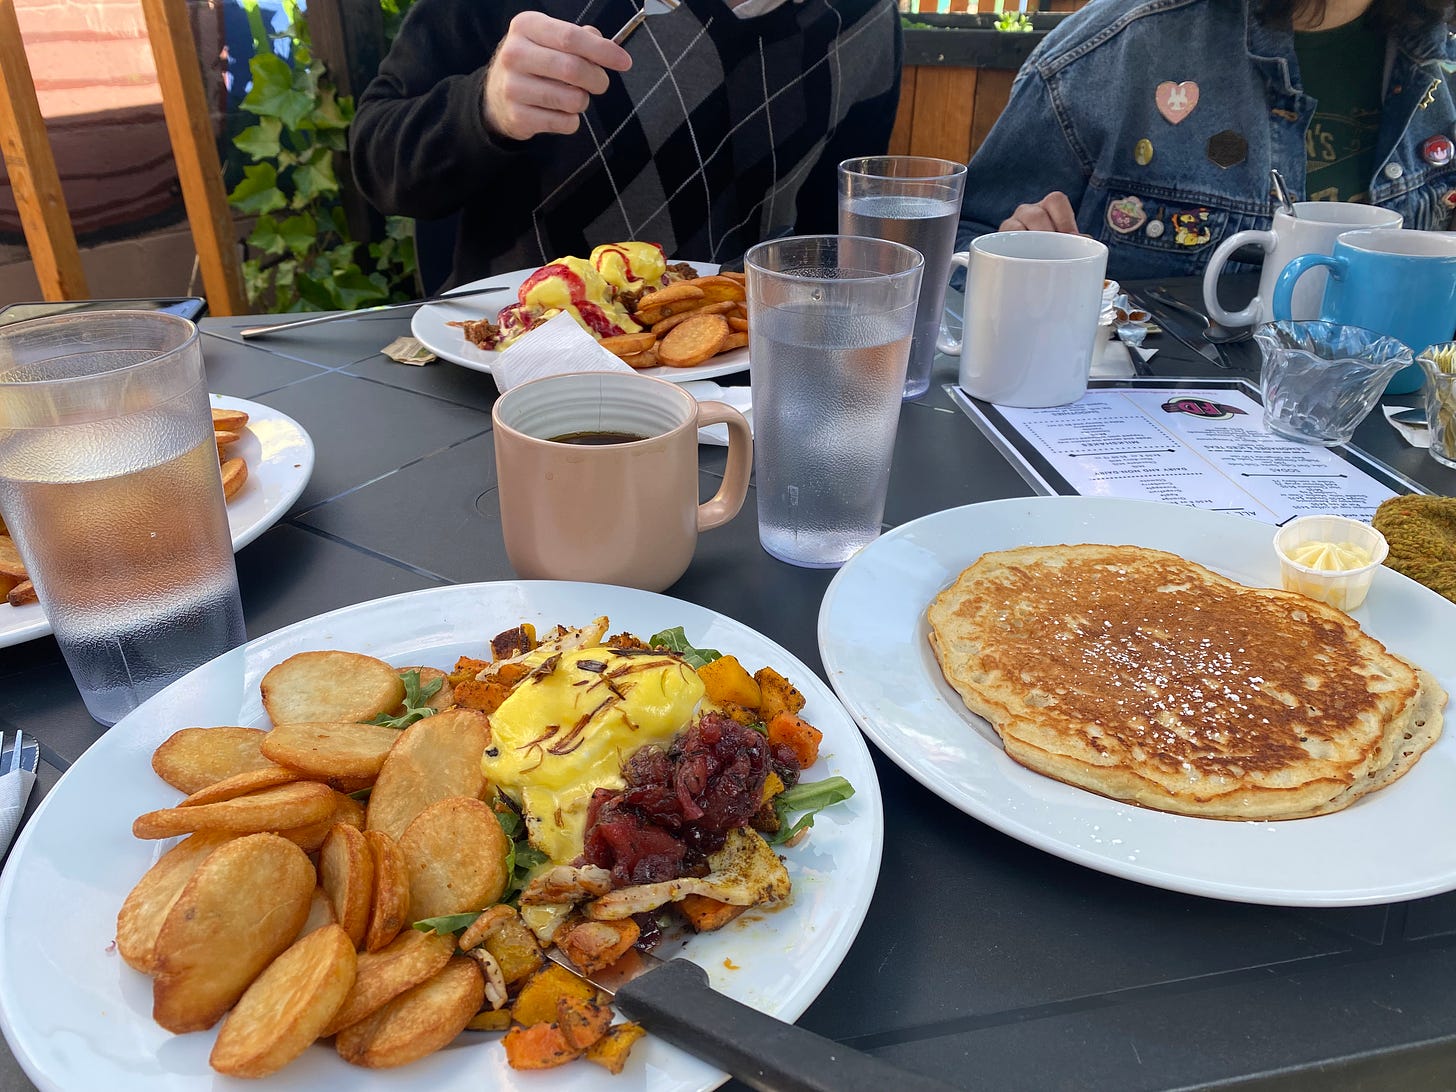 A patio table with plates of breakfast foods and cups of coffee and water. In the foreground is a plate with fried slices of potato, a half benny with yams and chutney and arugula, and another plate with a large pancake and a side of whipped butter. My brother Riley is visible in the background, his hand holding a fork over his plate.